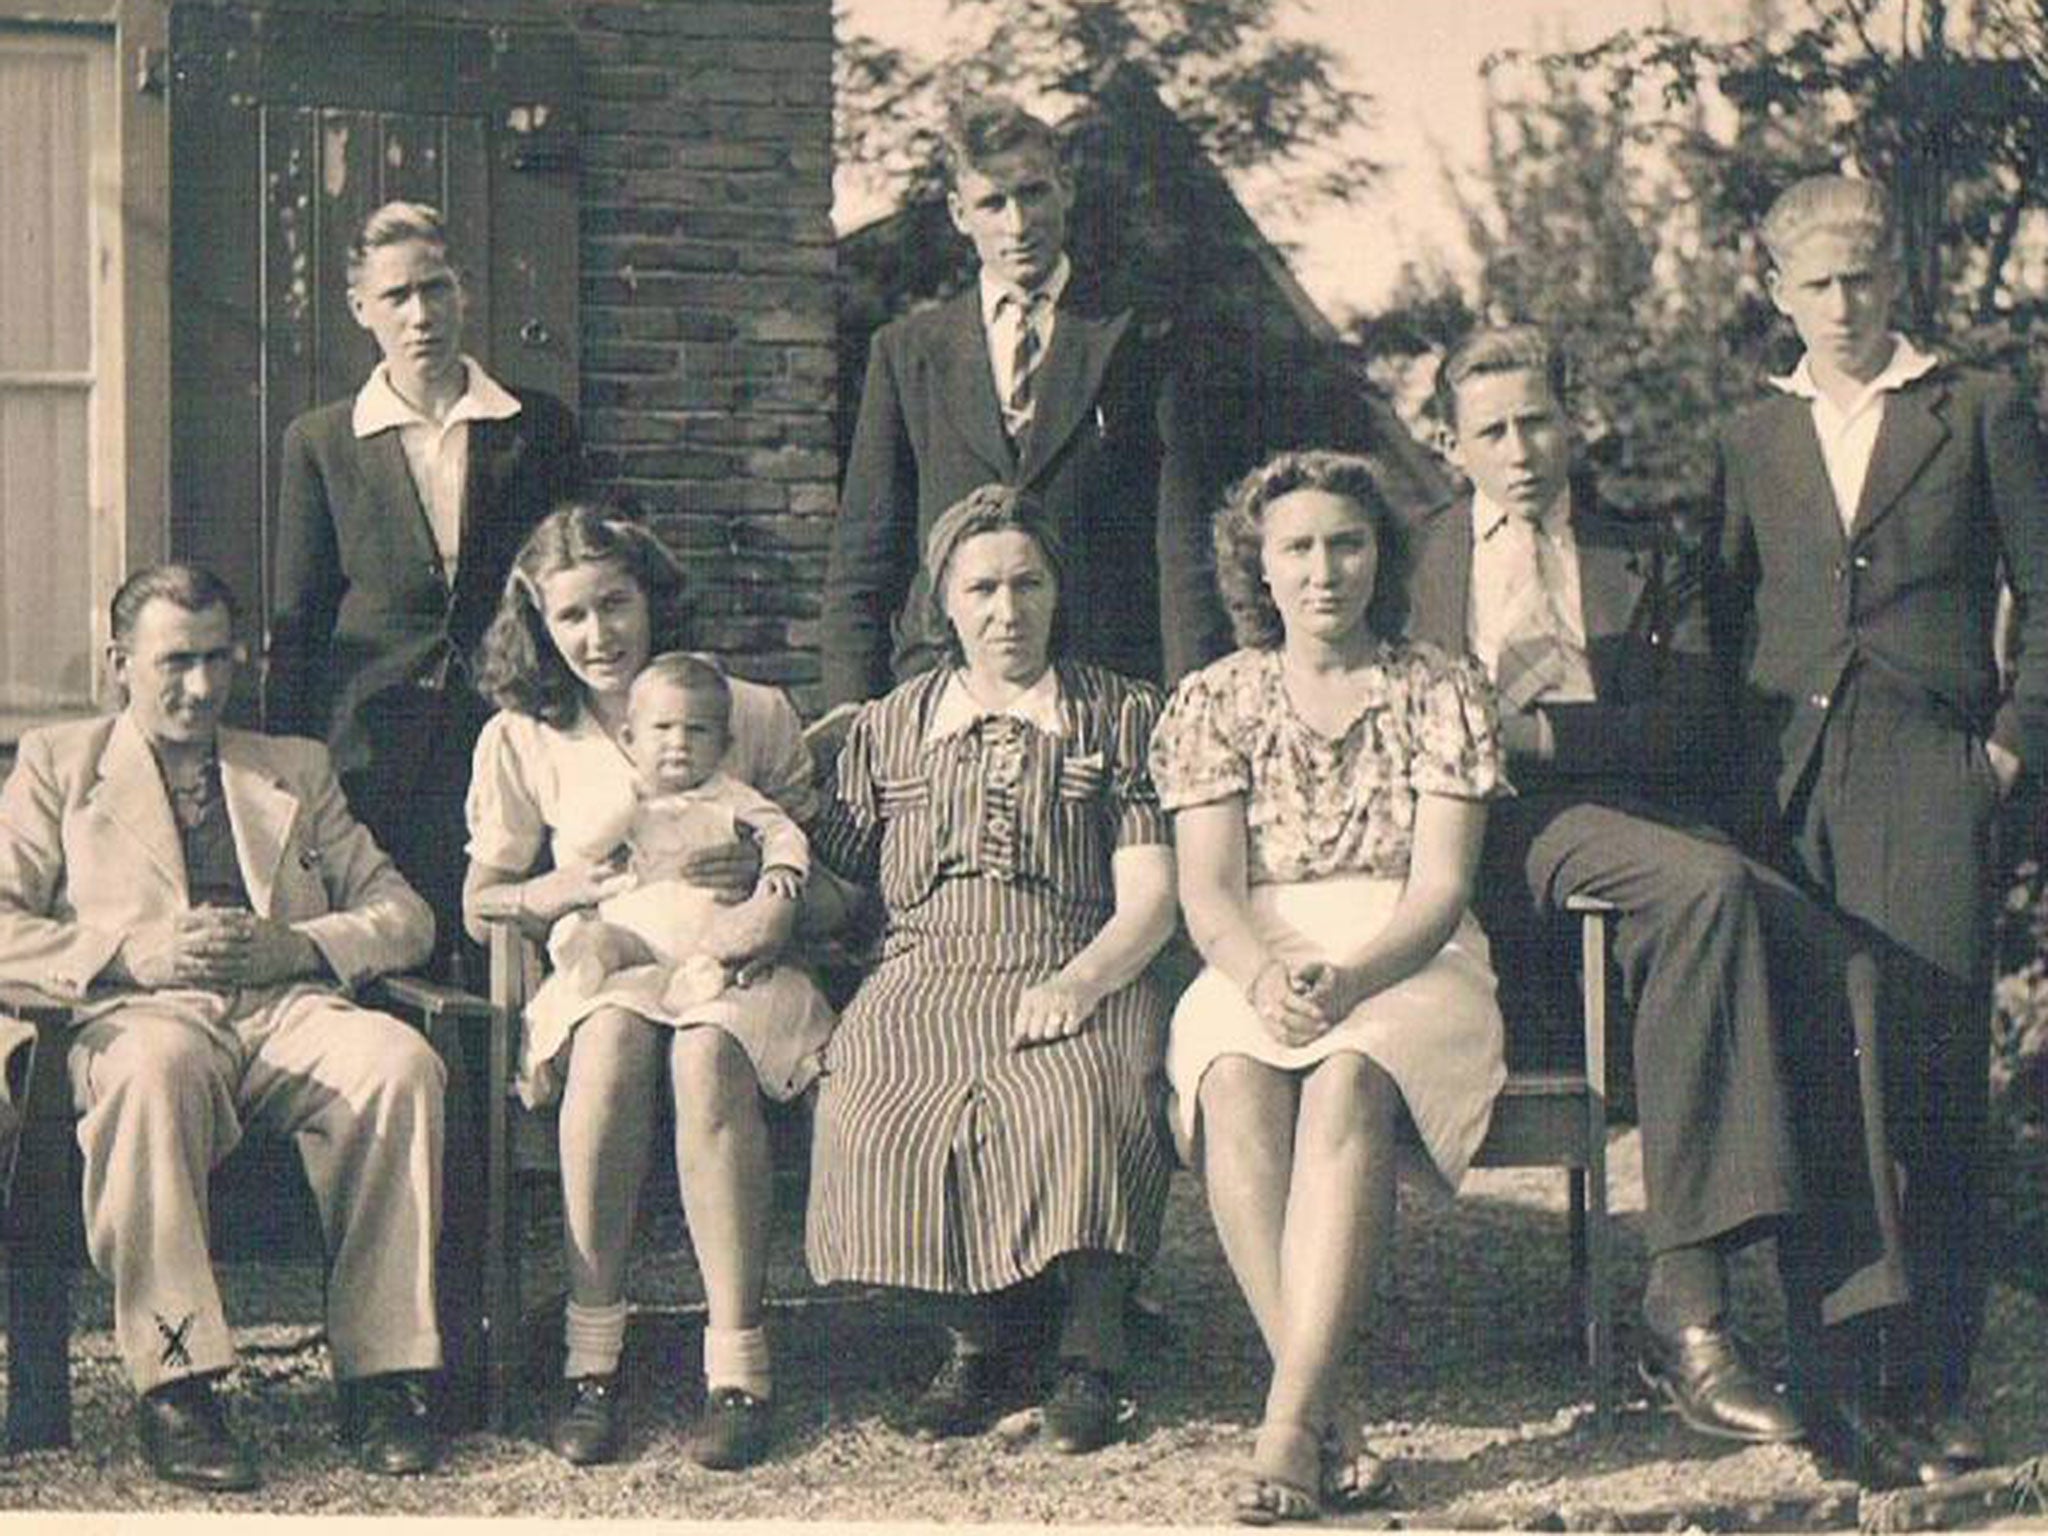 The Zanoli family pictured in 1942. Jans in the middle, between her 4 sons, two daughters, a son in law and a grandchild